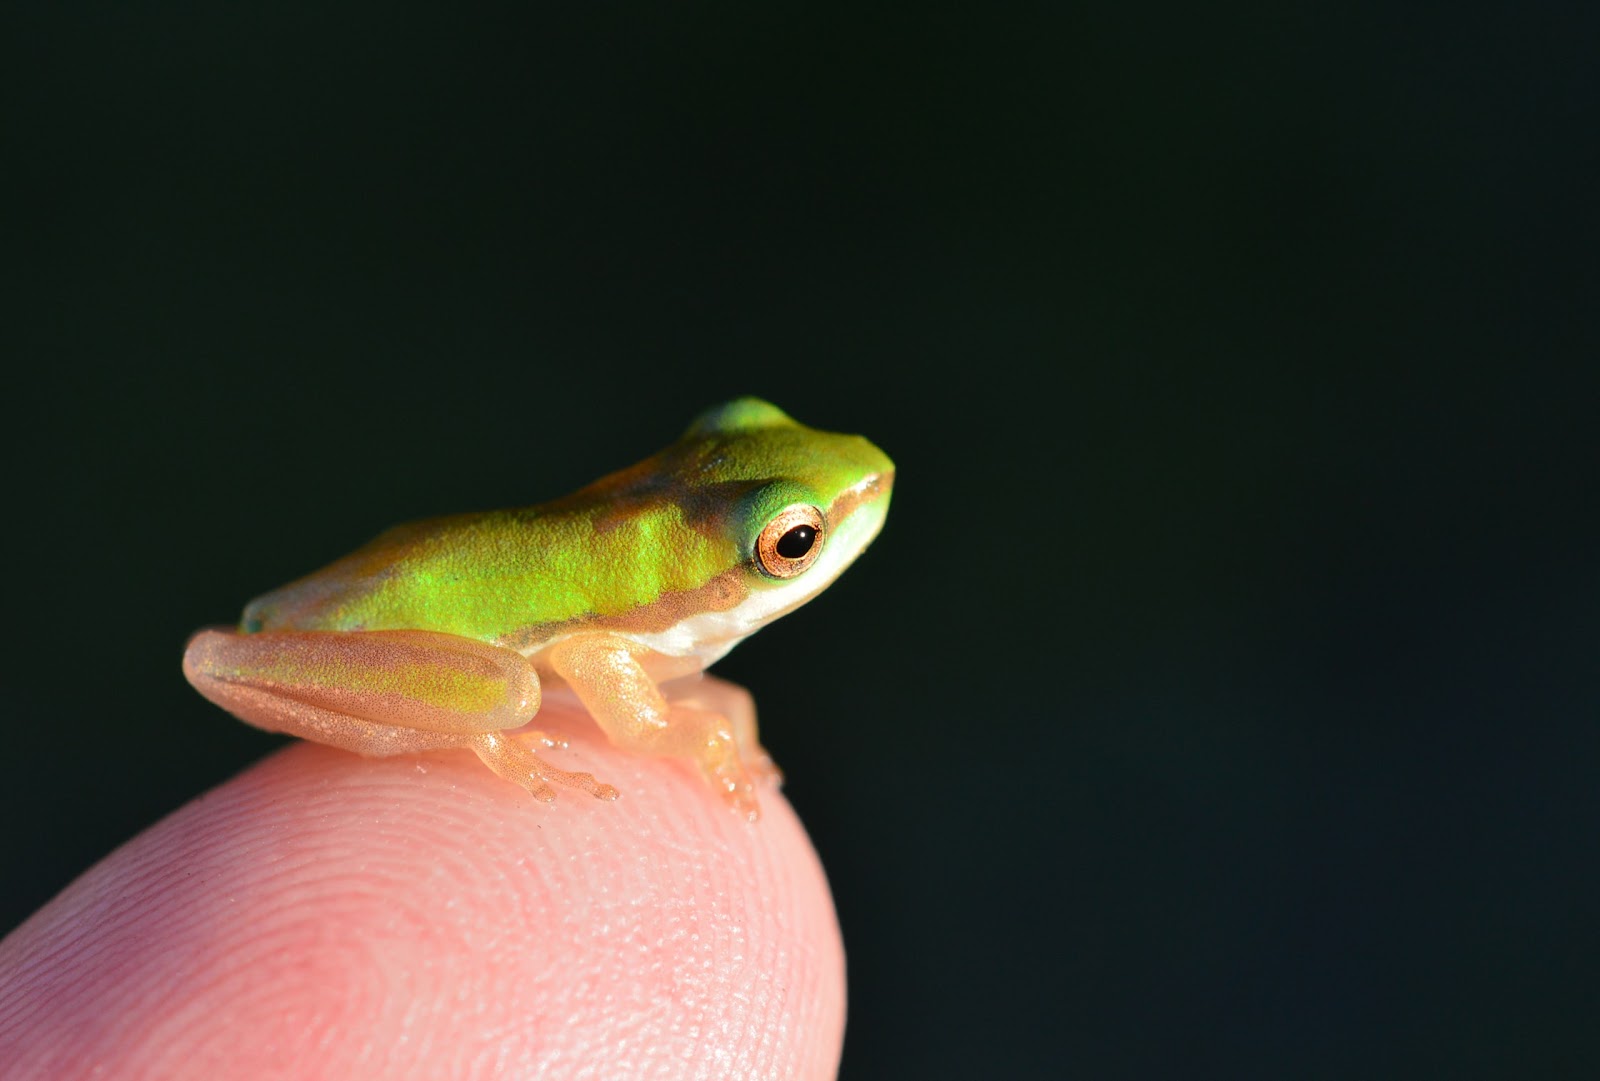 Tiny green tree frog on a fingertip